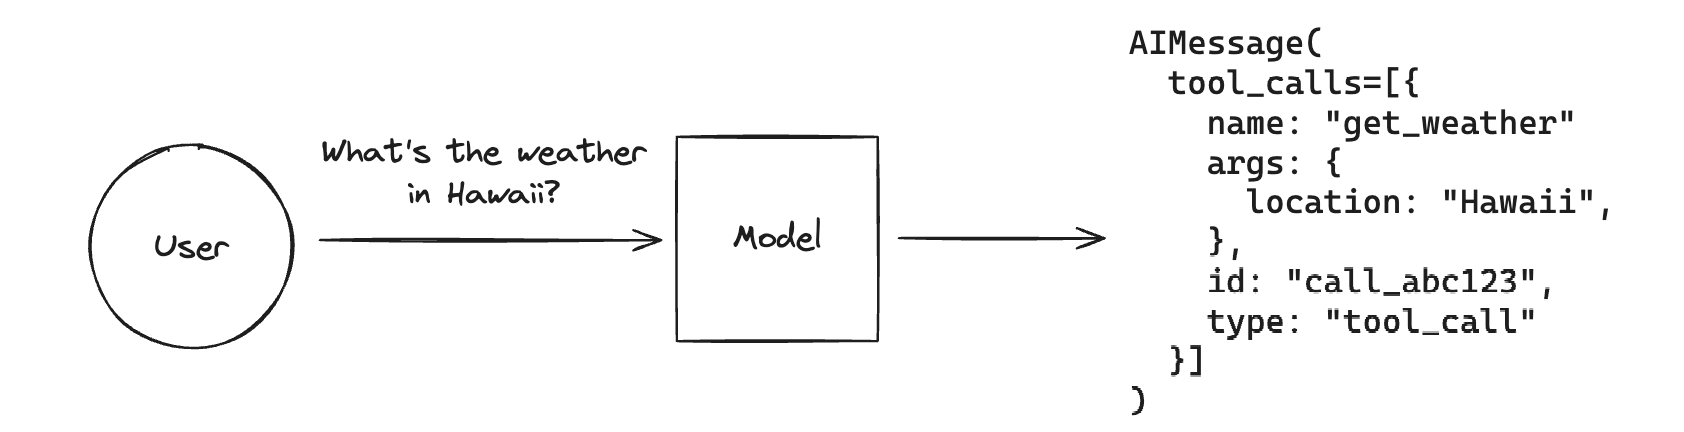 Diagram of a tool call by a chat model